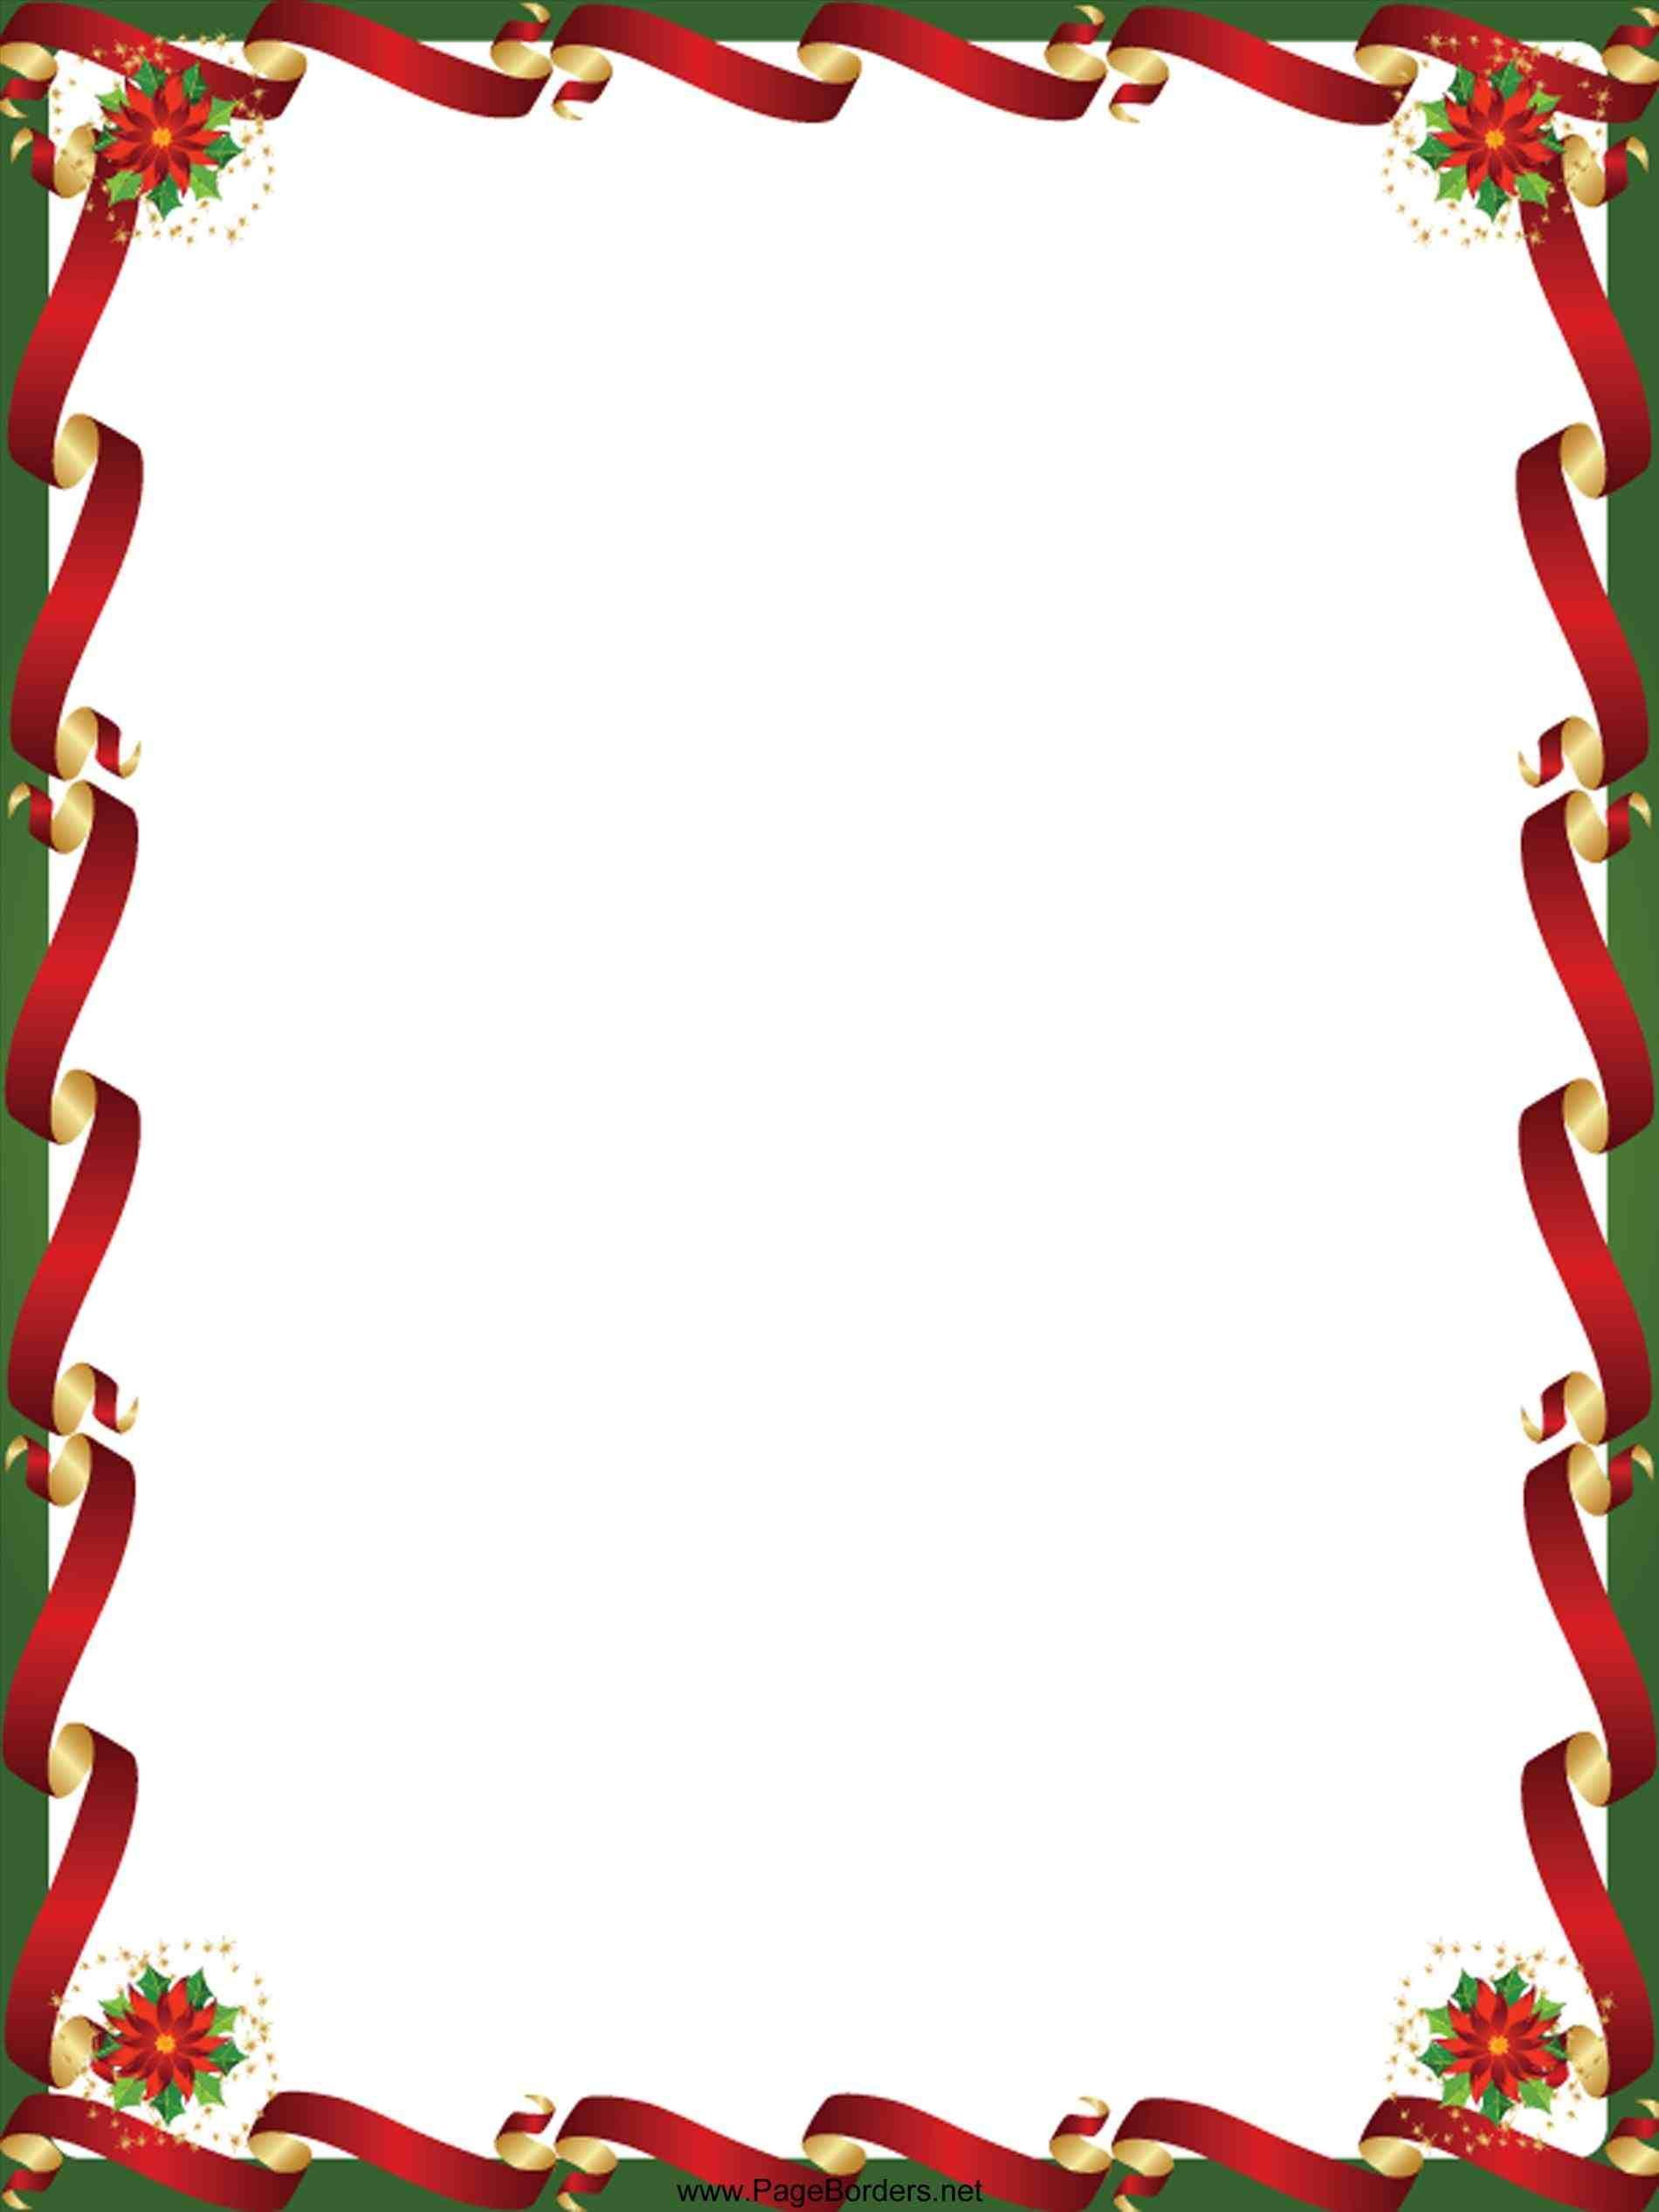 This free christmas border download new